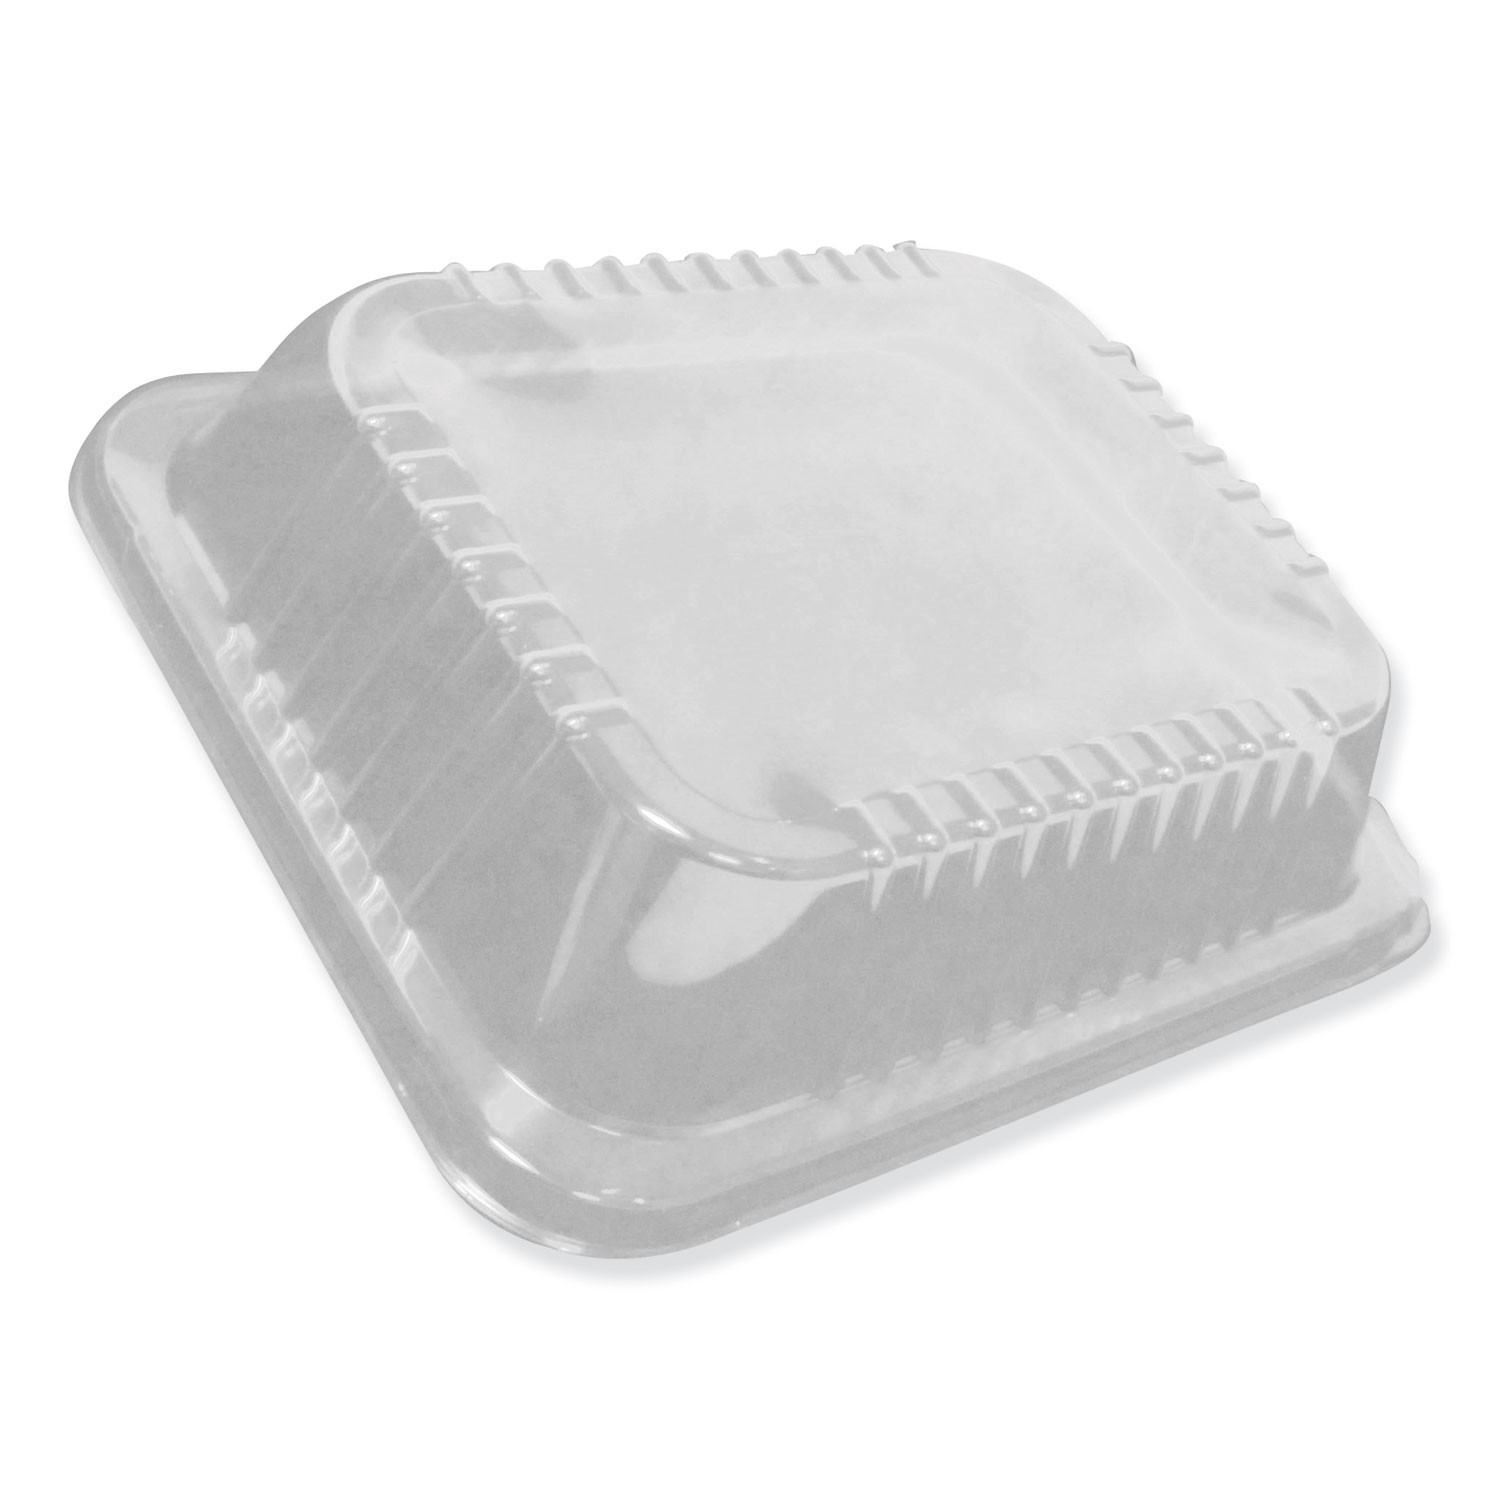  Durable Packaging P4200100 Dome Lids for 10 1/2 x 12 5/8 Oblong Containers, High Dome, 100/Carton (DPKP4200100) 